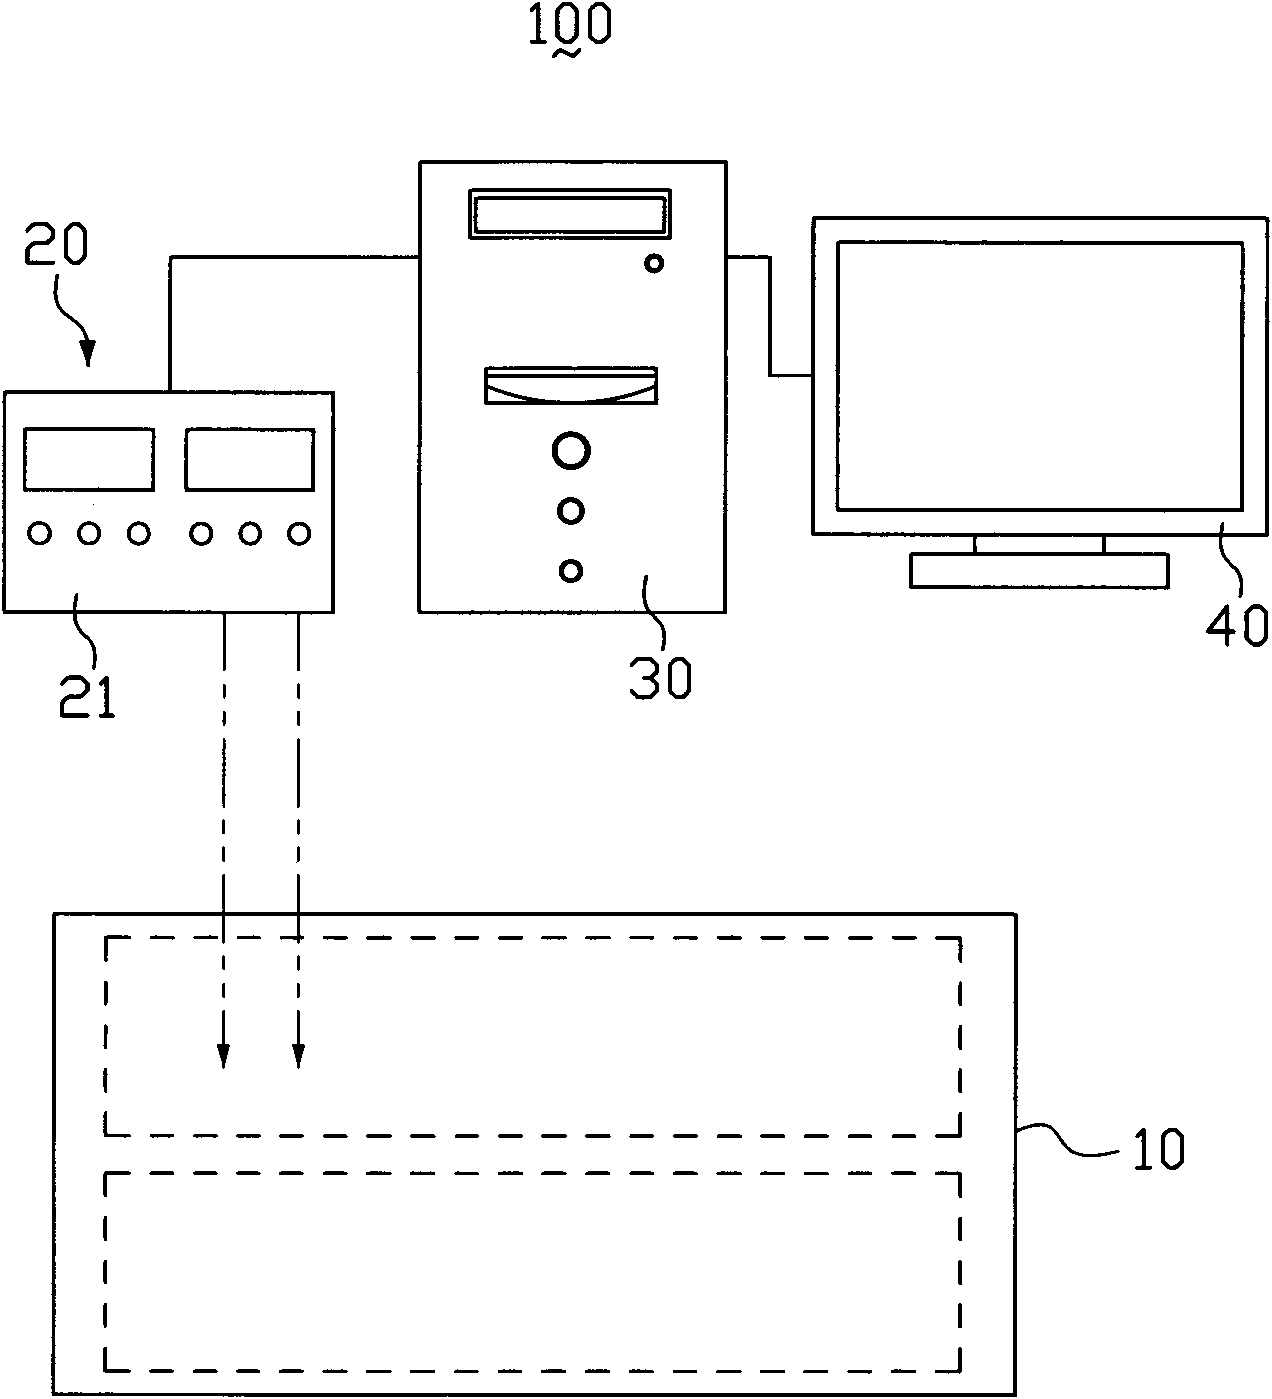 Hemocyte analysis chip and system for using chip thereof